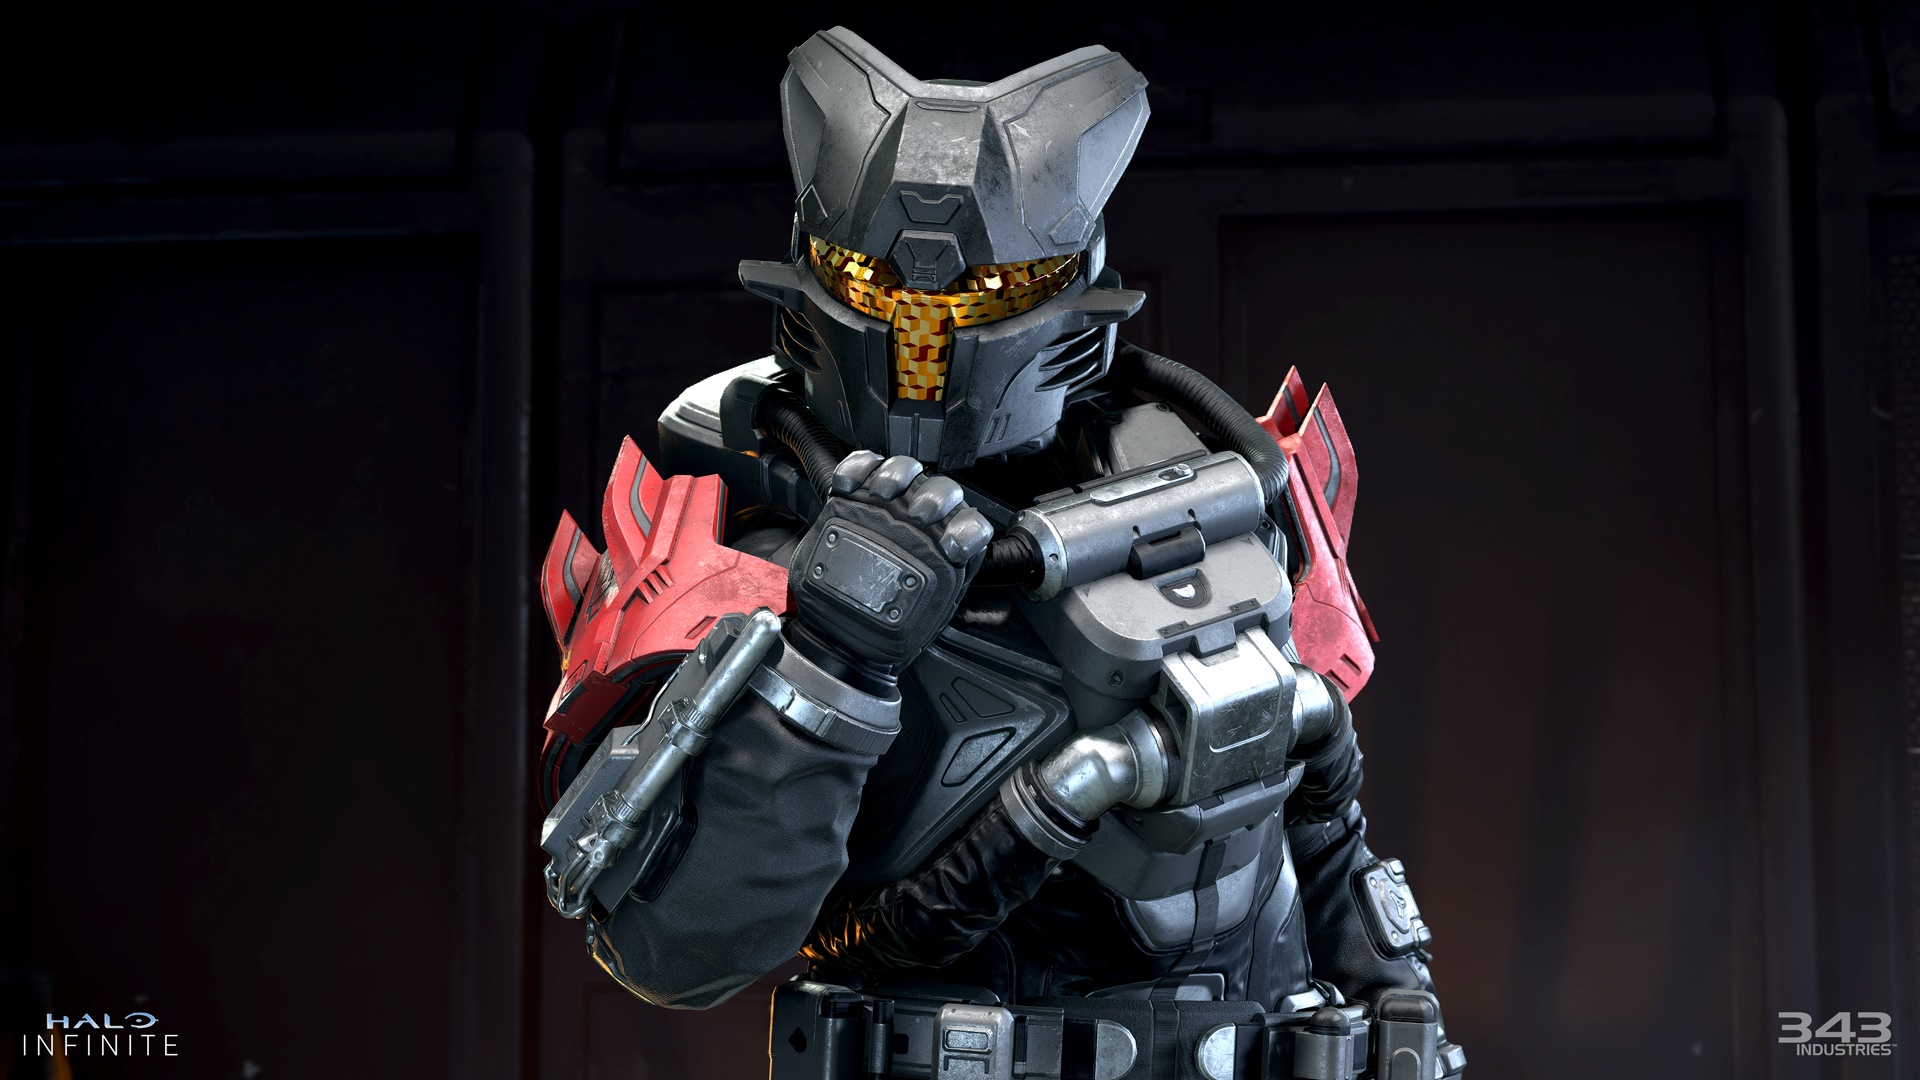 Halo Infinite screenshot of a Spartan in Banished-themed armor